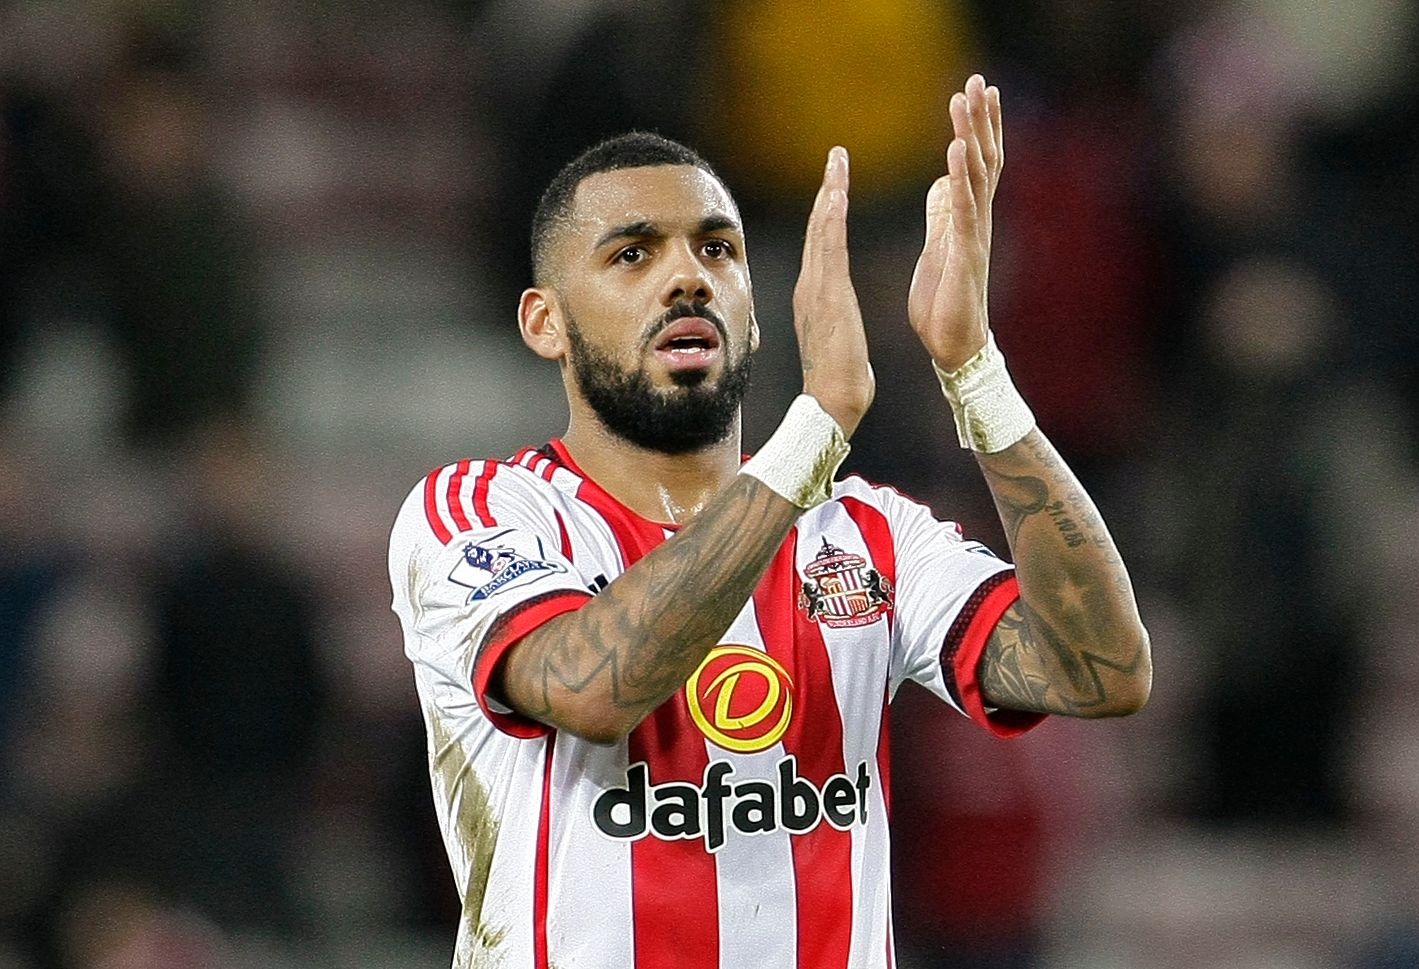 Football Soccer - Sunderland v AFC Bournemouth - Barclays Premier League - Stadium of Light - 15/16 - 23/1/16 
Sunderland's Yann M'Vila 
Action Images via Reuters / Craig Brough 
EDITORIAL USE ONLY. No use with unauthorized audio, video, data, fixture lists, club/league logos or 